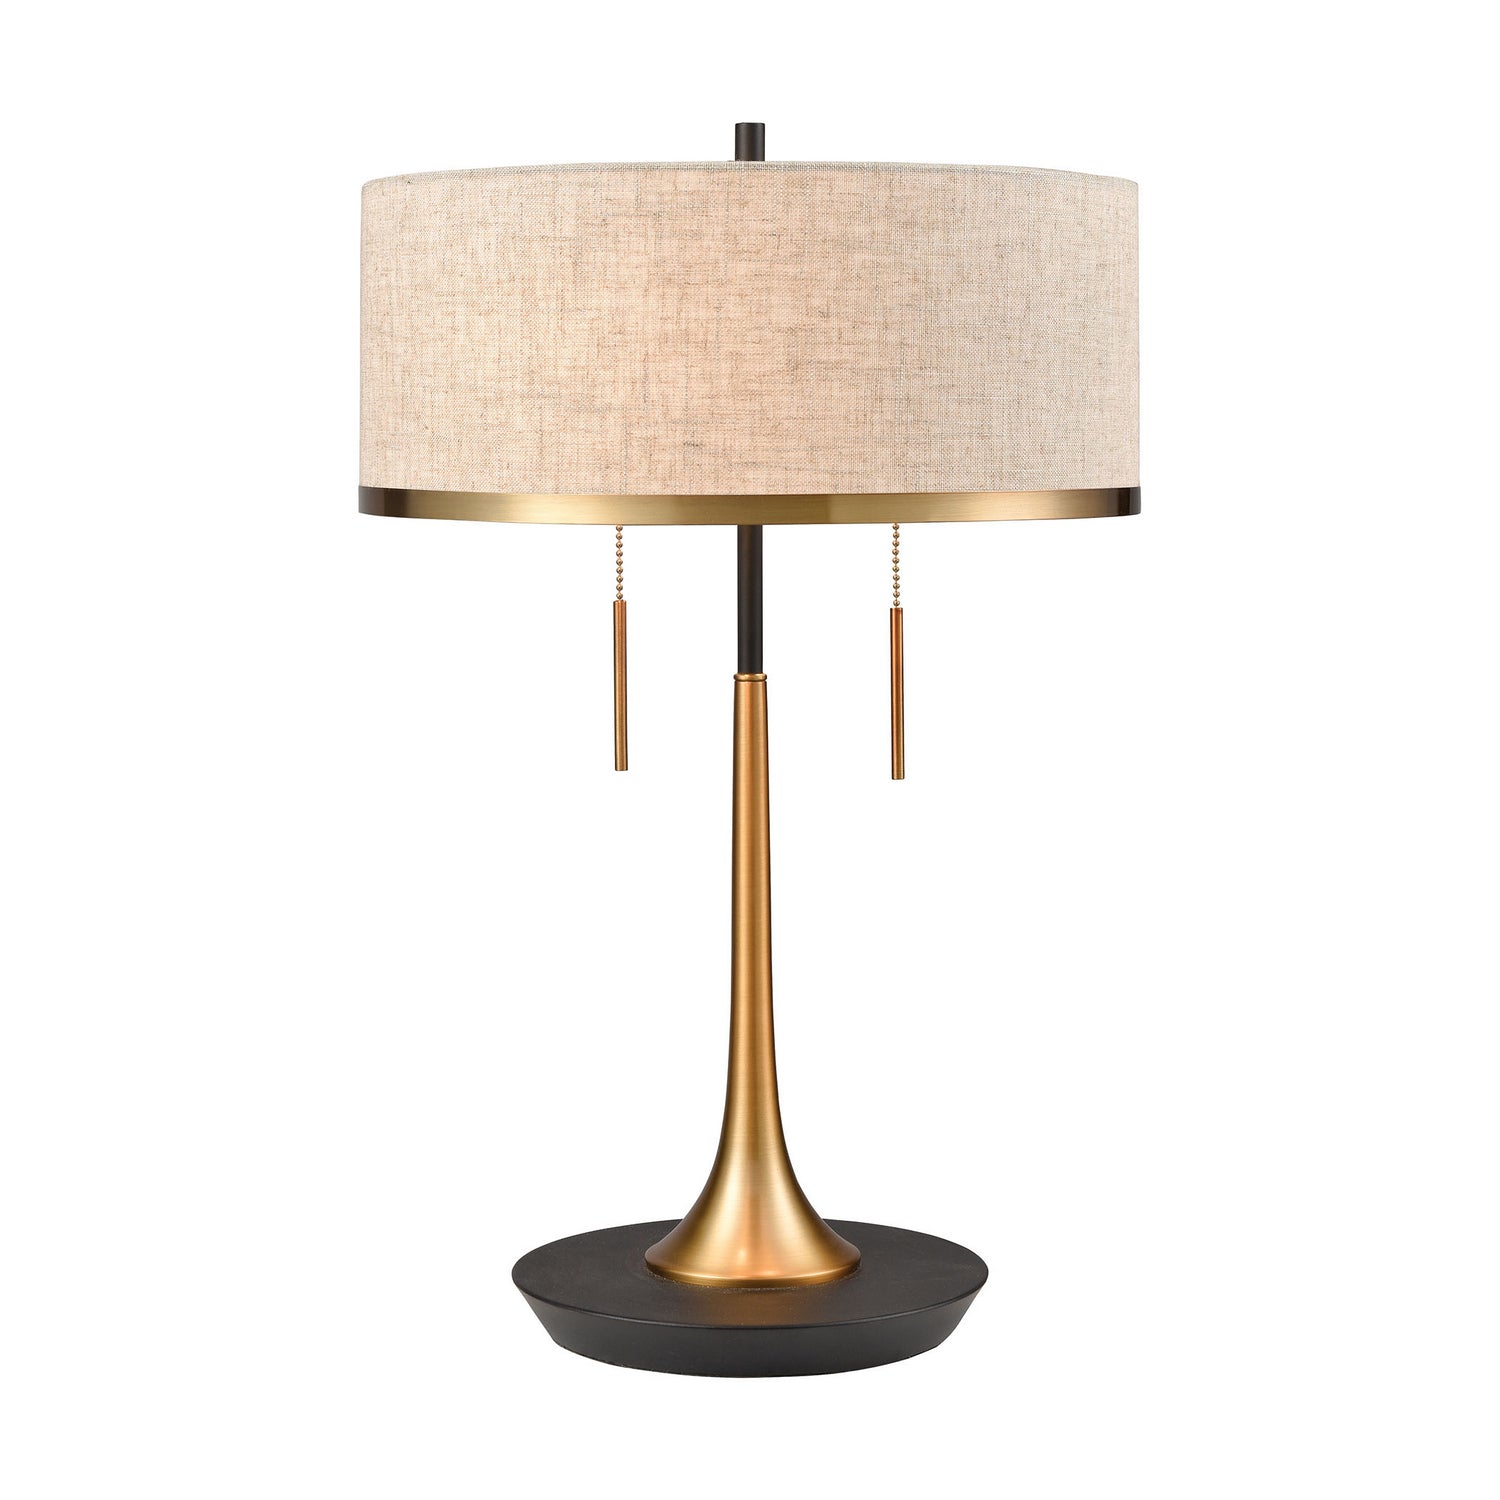 ELK Home - D4067 - Two Light Table Lamp - Magnifica - Brass